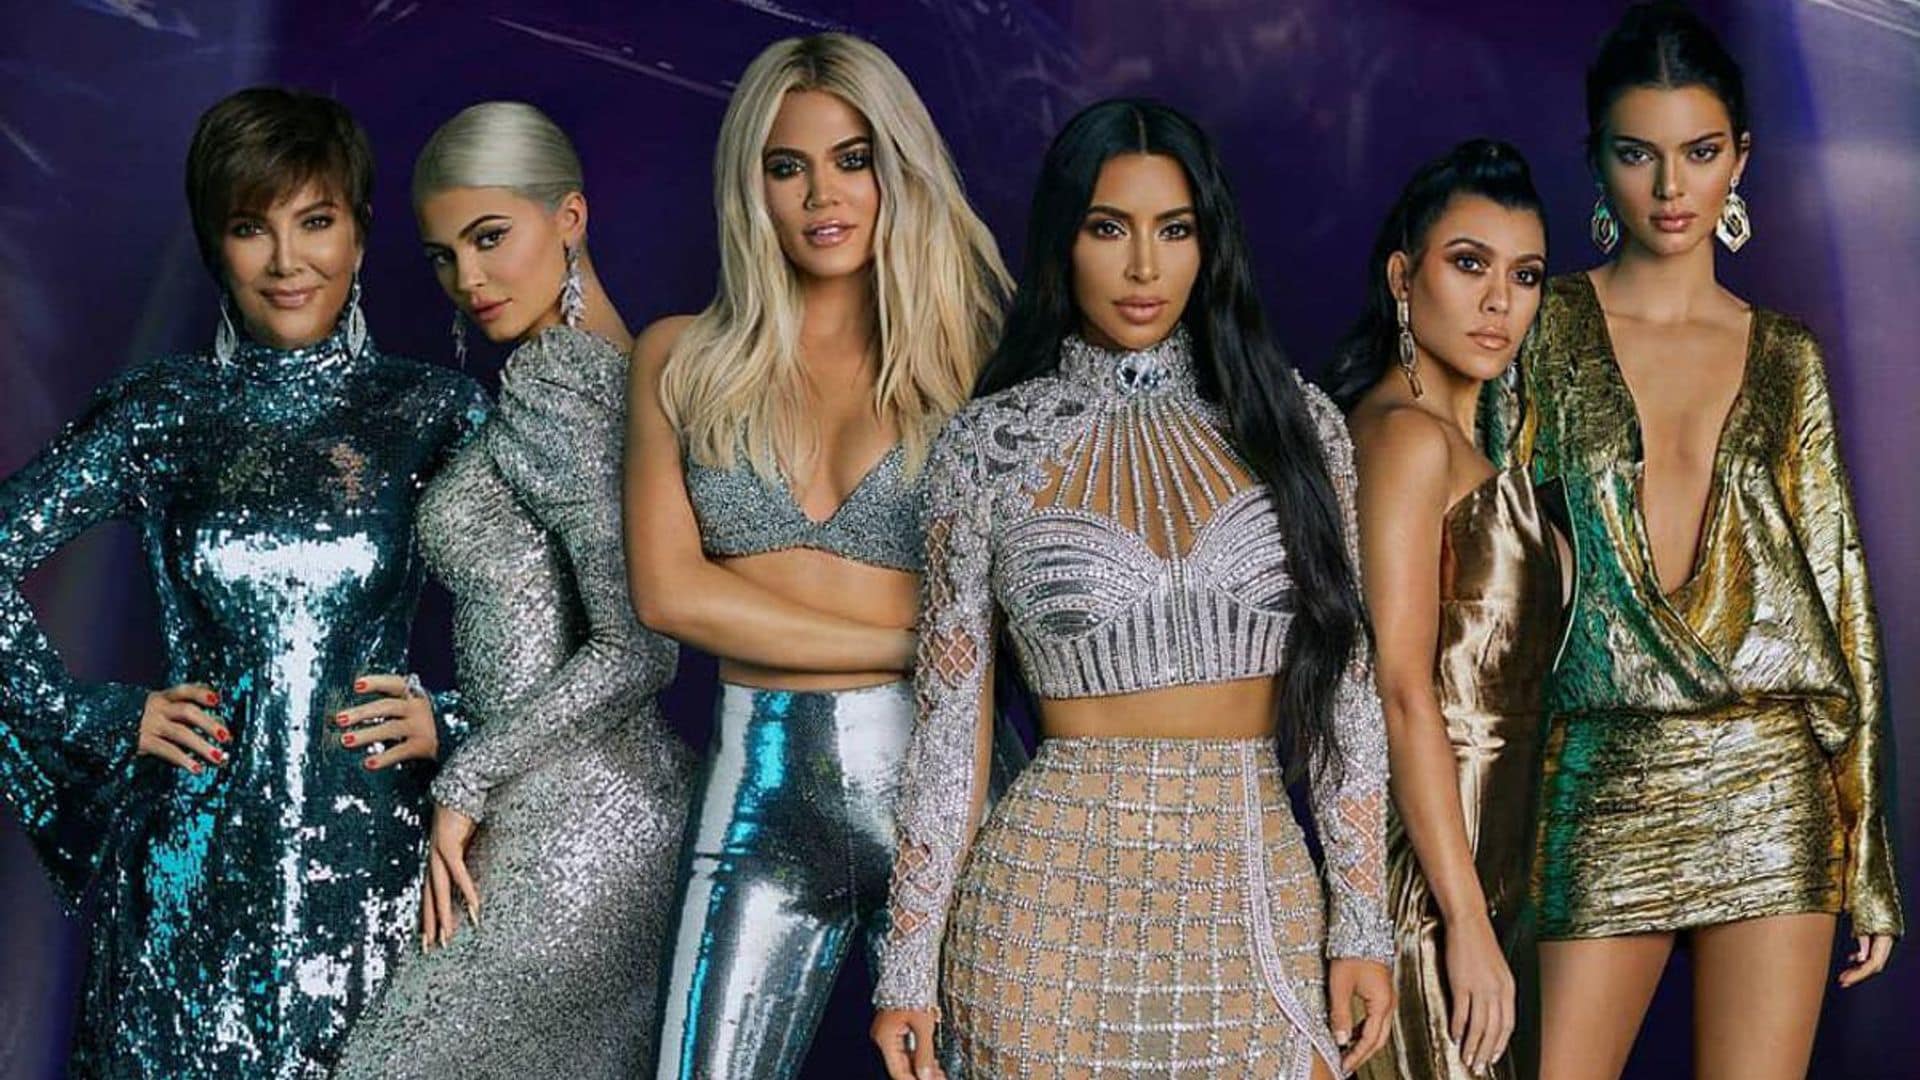 The Kardashians are ready to premiere their upcoming show on Hulu! Find here when to watch